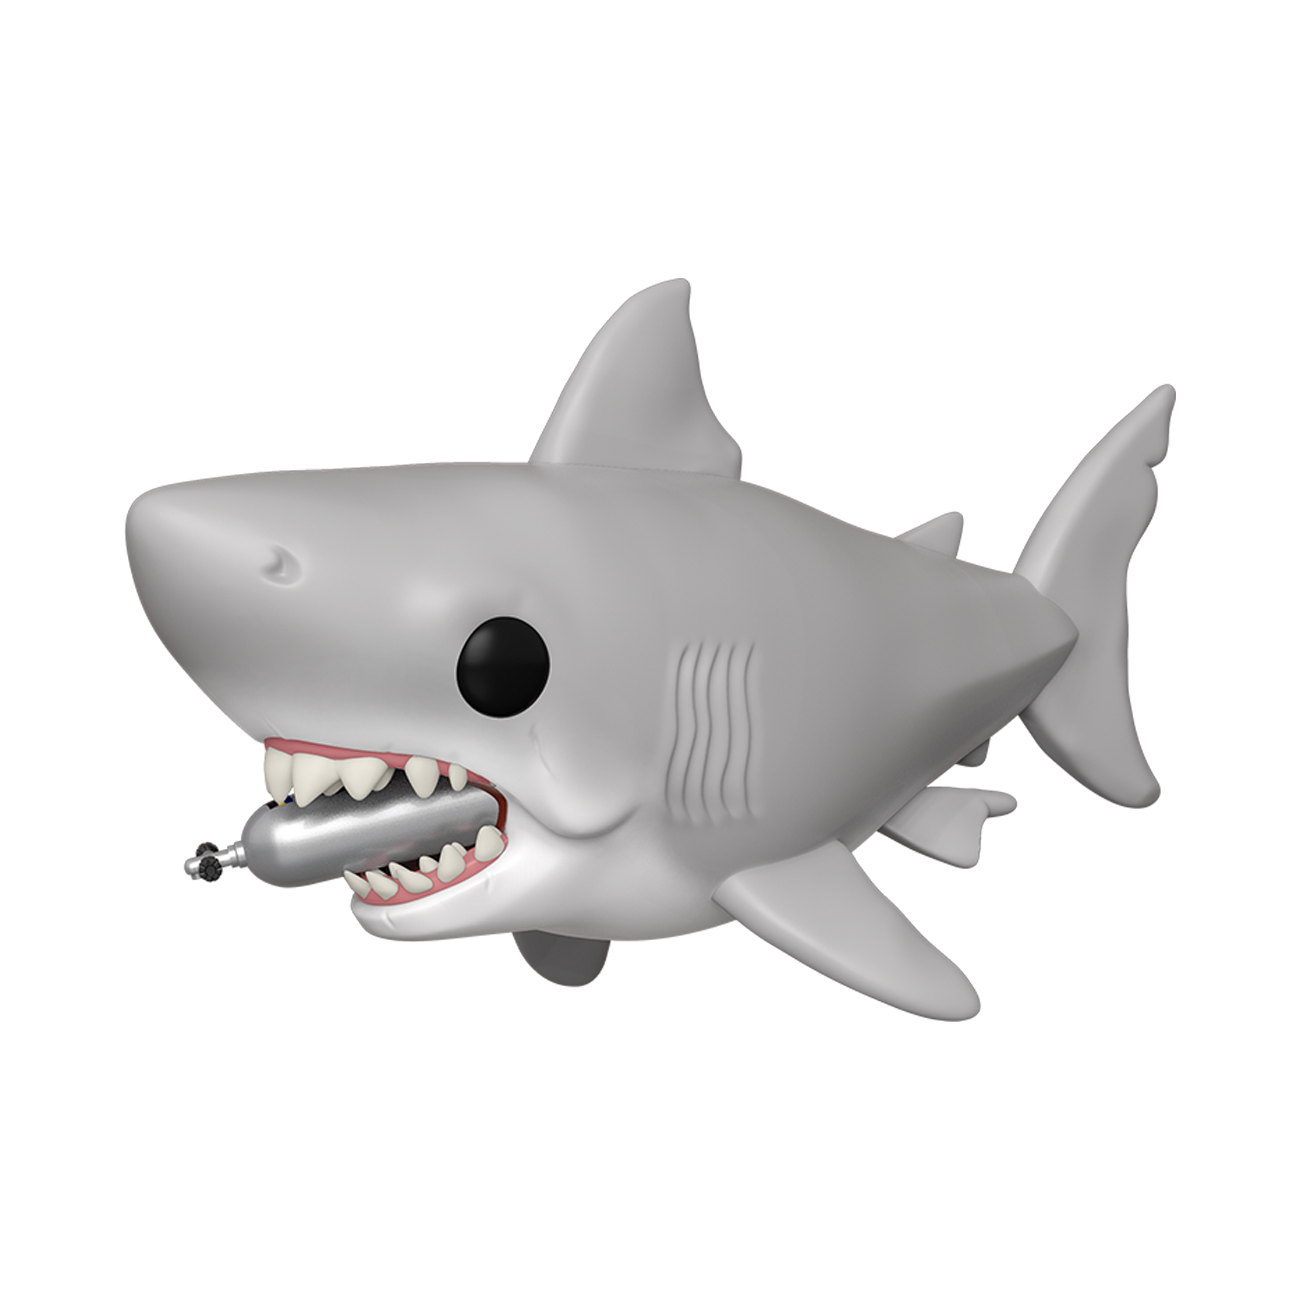 Jaws Funko POP Collectible Figure - 6